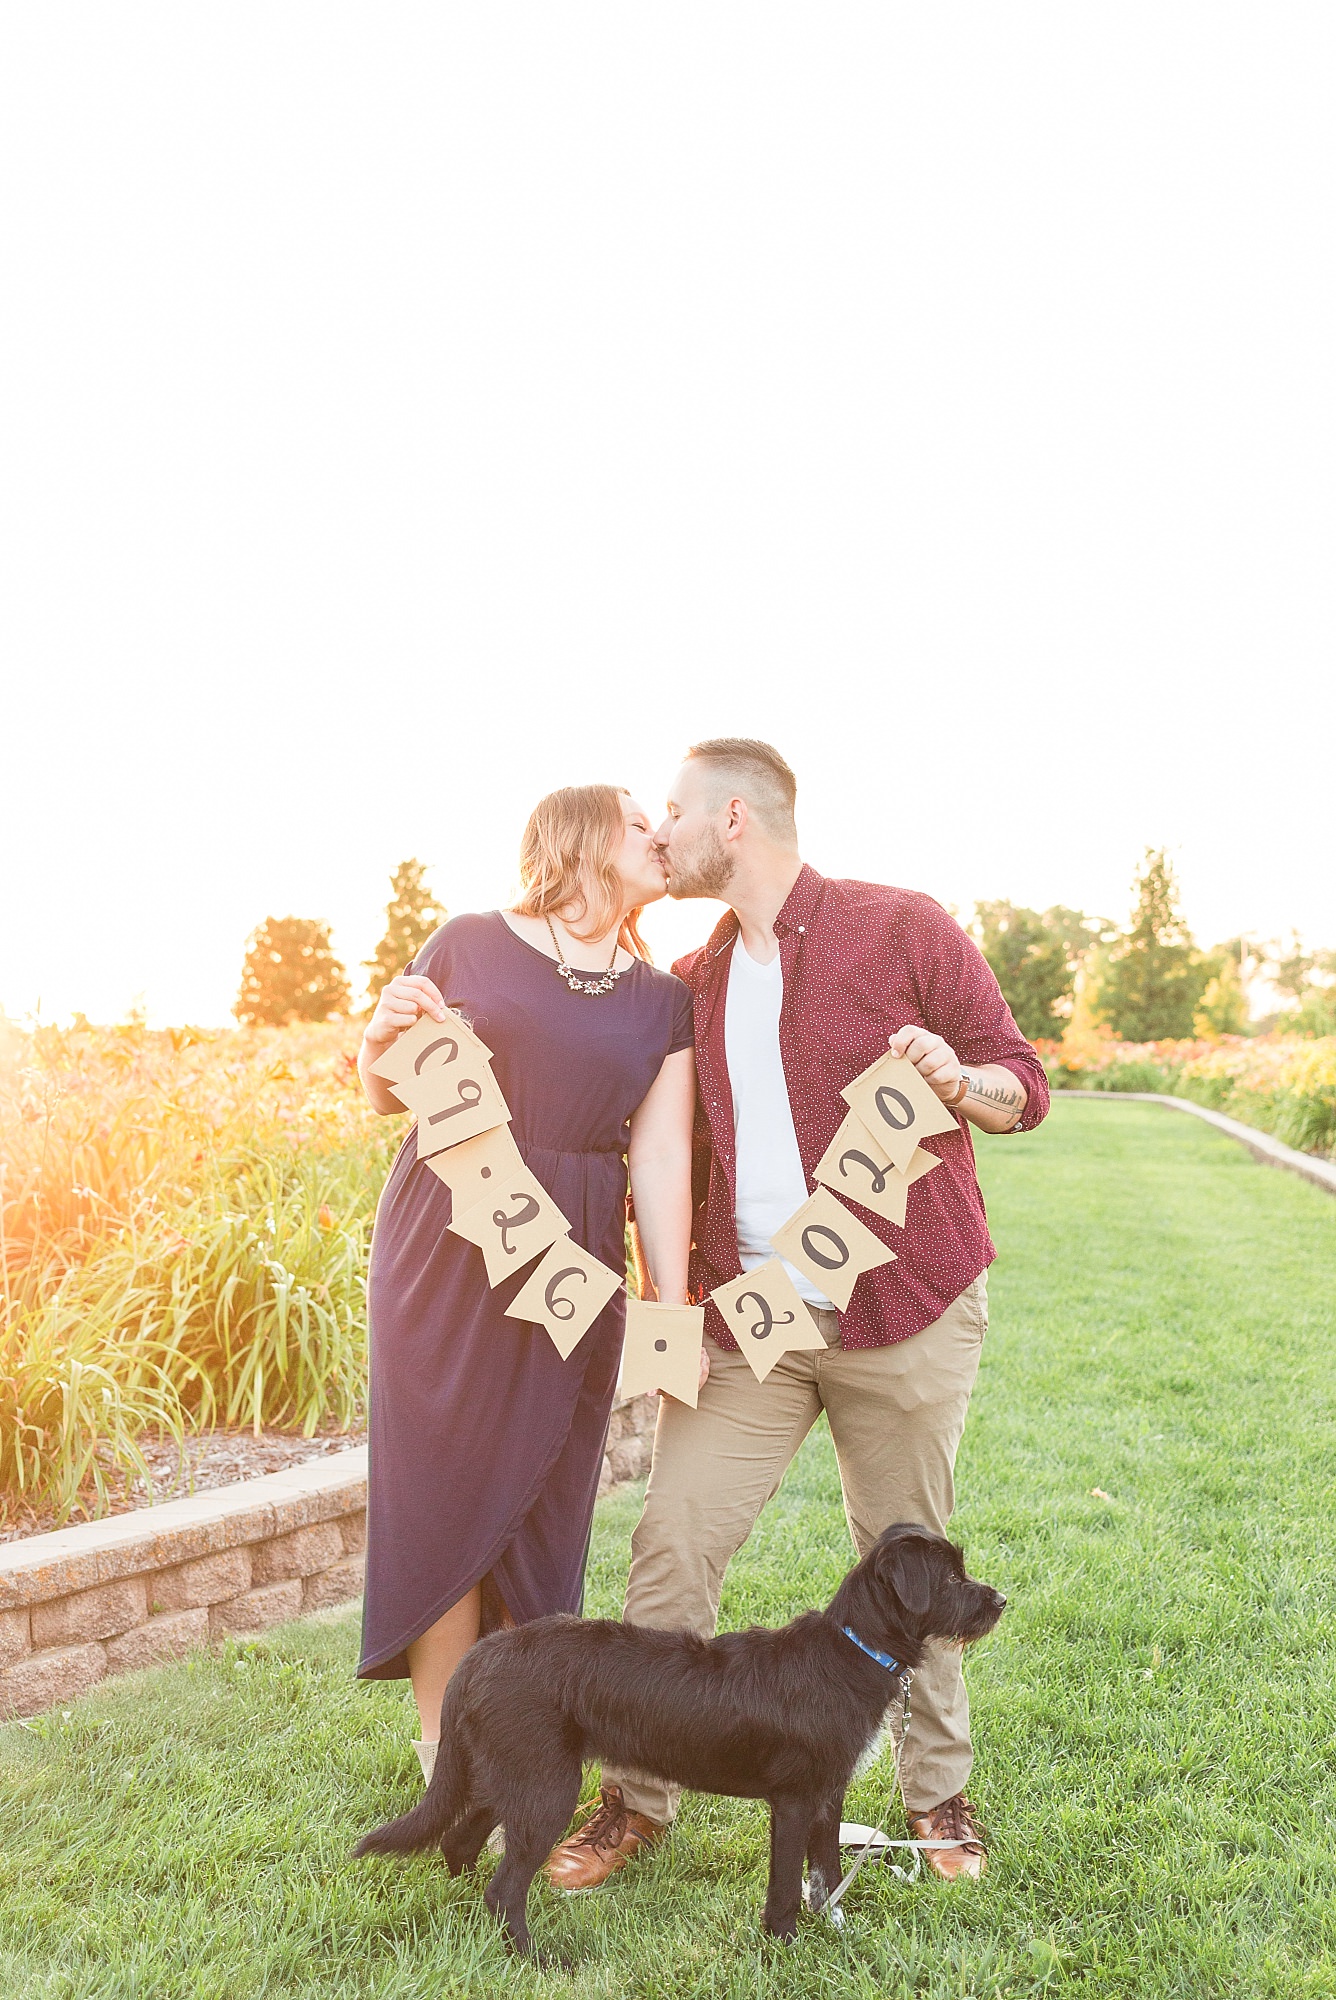 A couple kisses and holds a banner with their engagement date printed